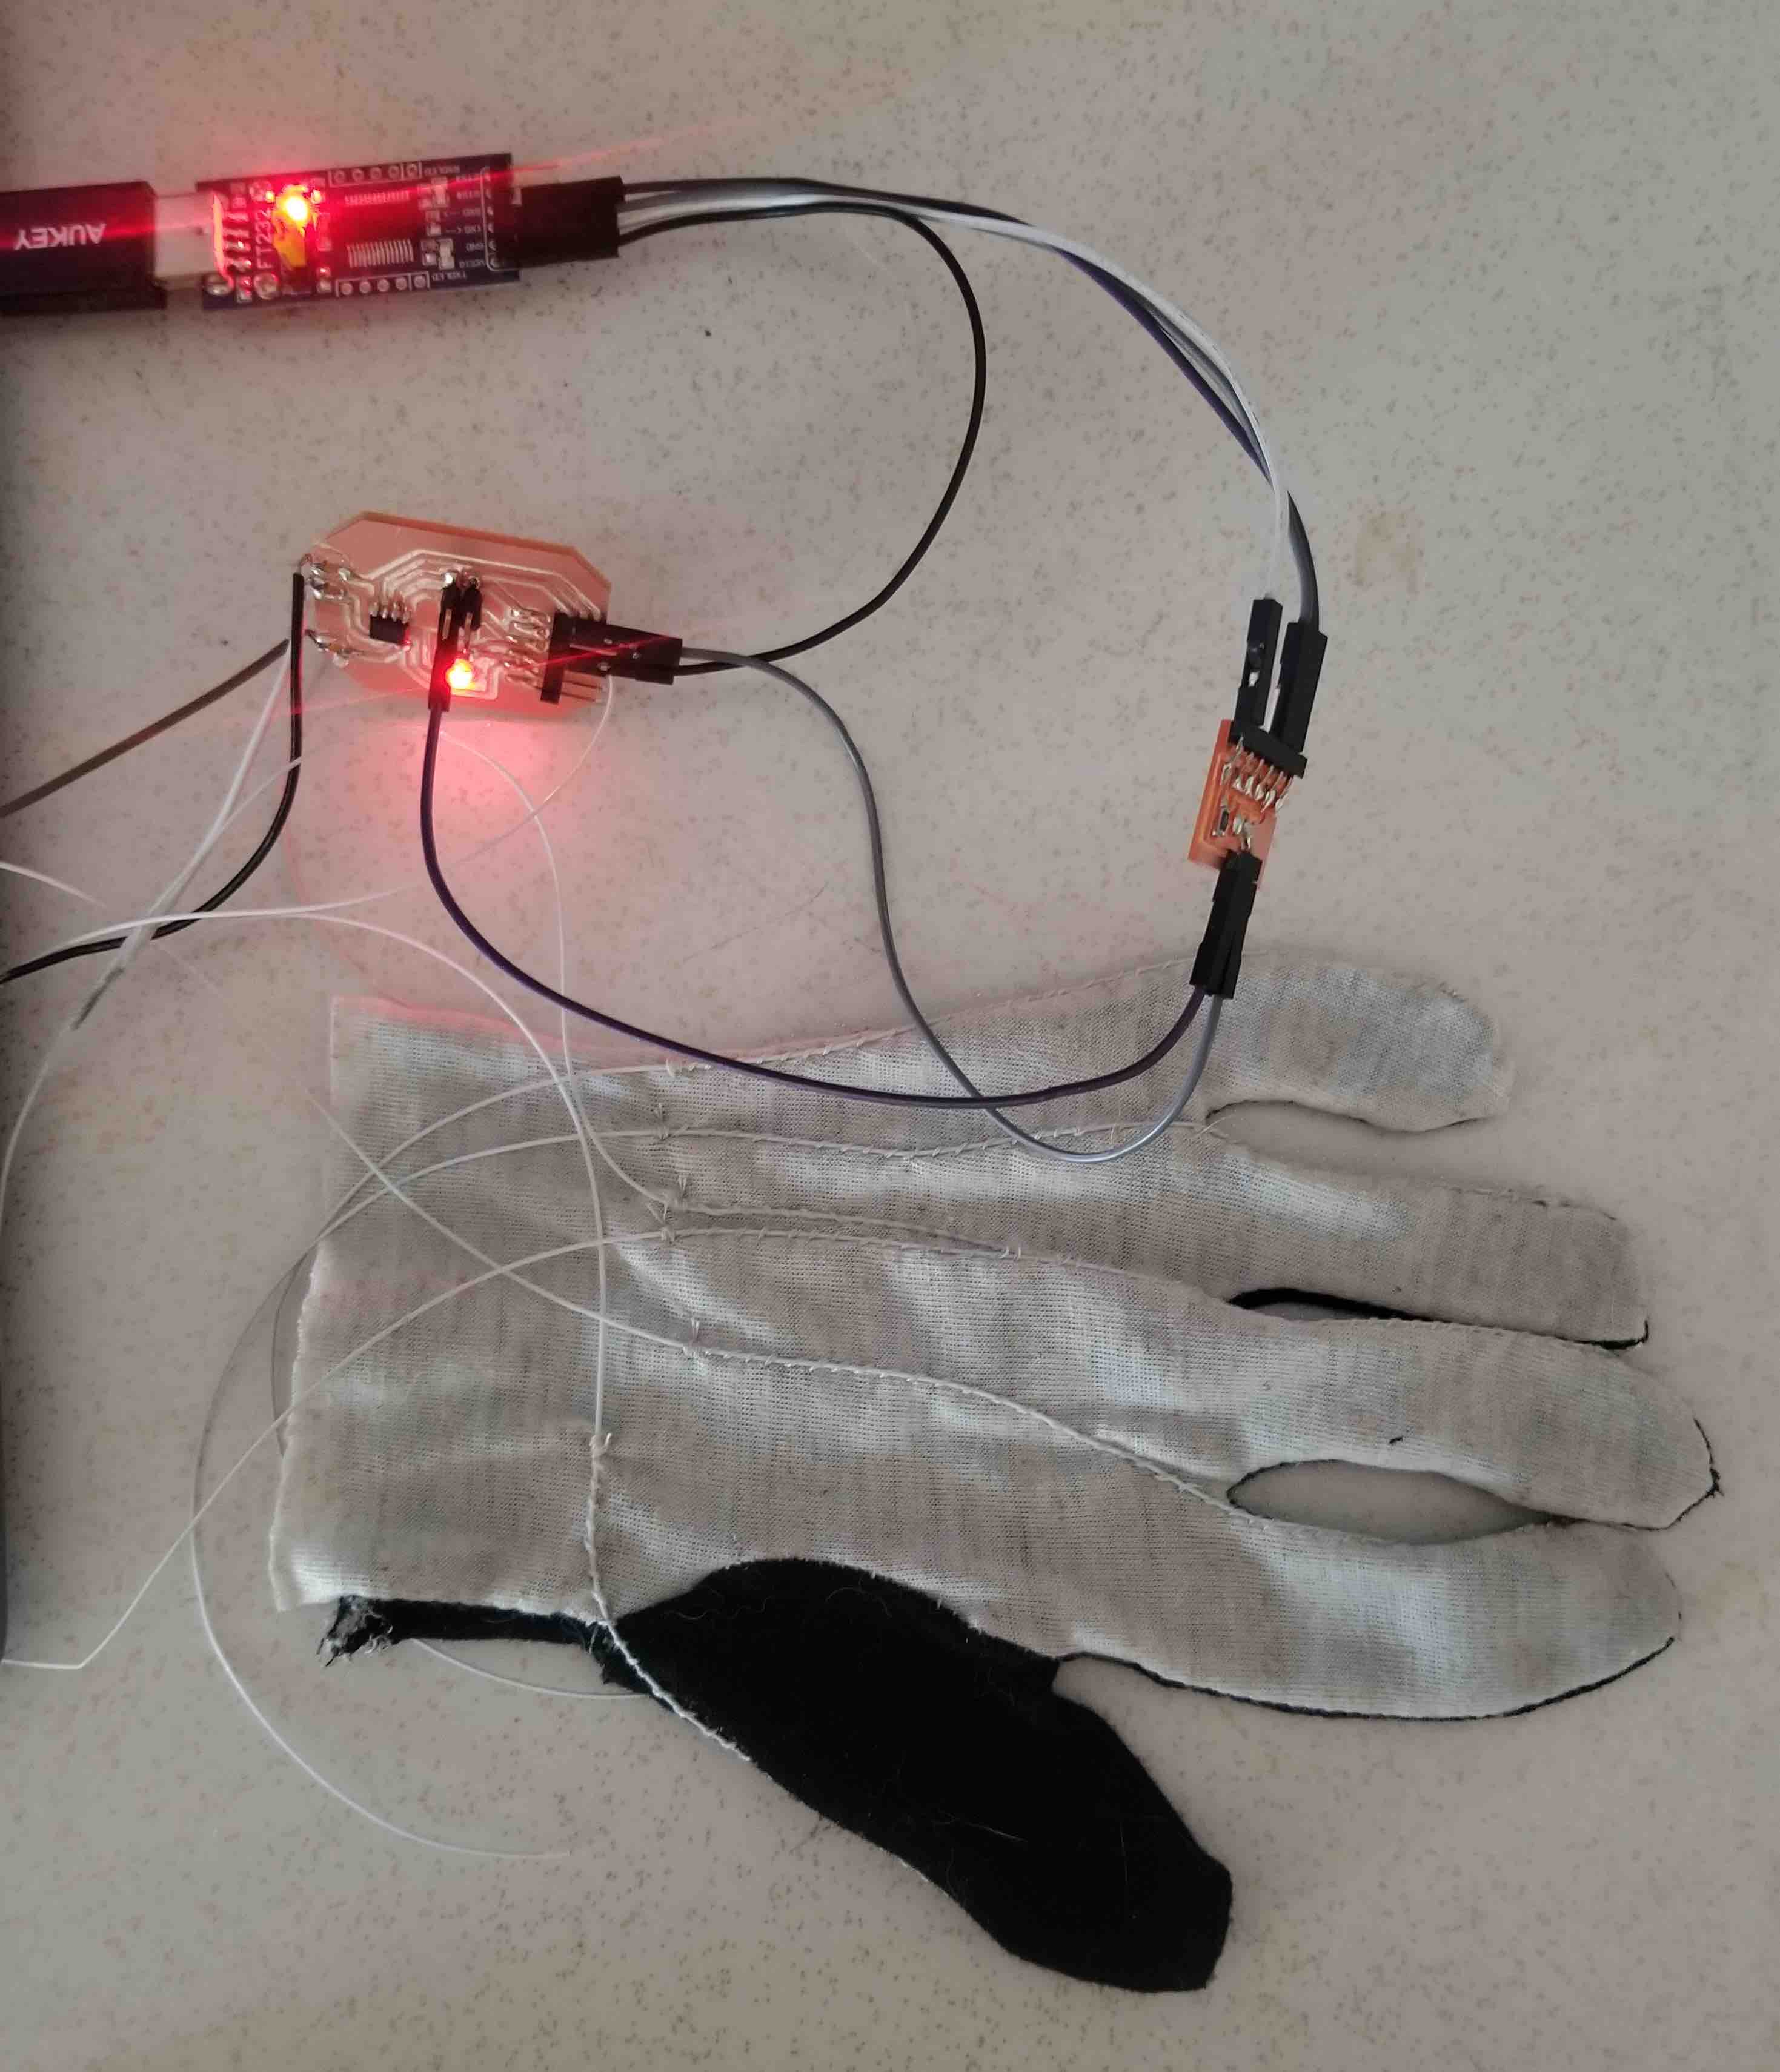 Integrated glove and circuit.